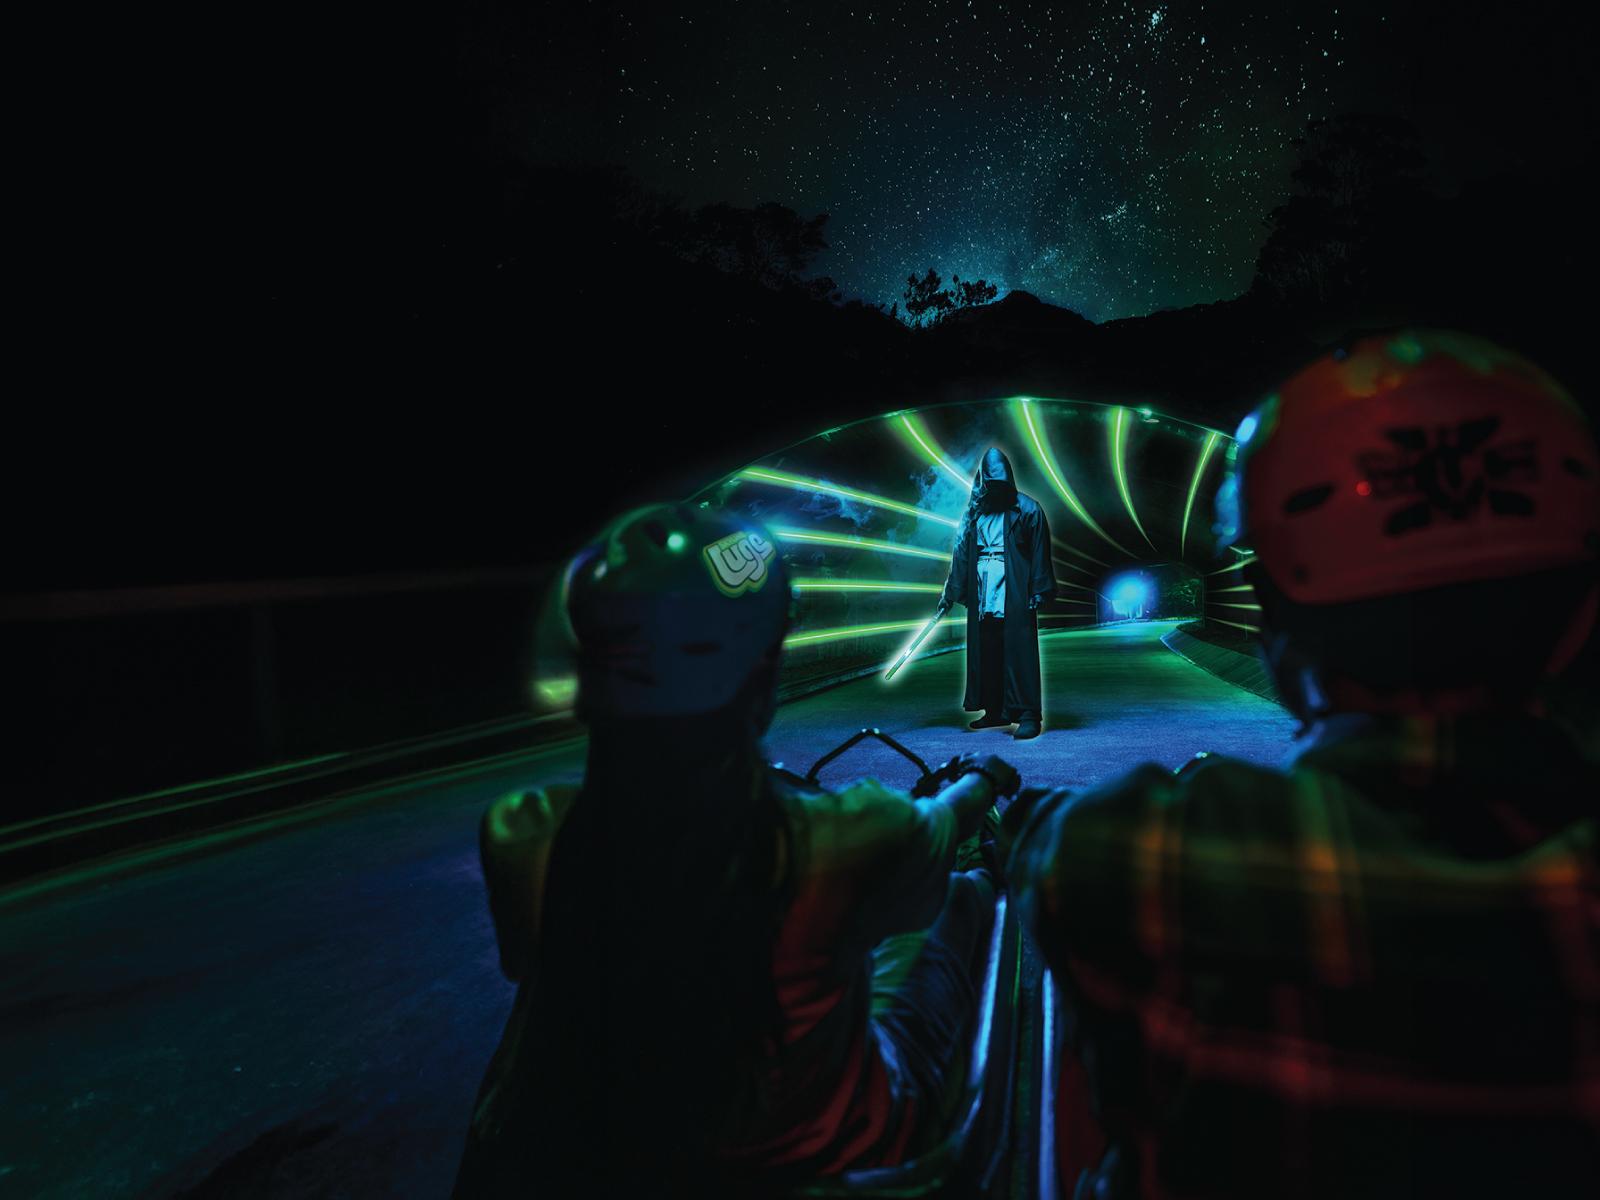 Two people Luge through an immersive light tunnel seeing a person holding a lightsabre.